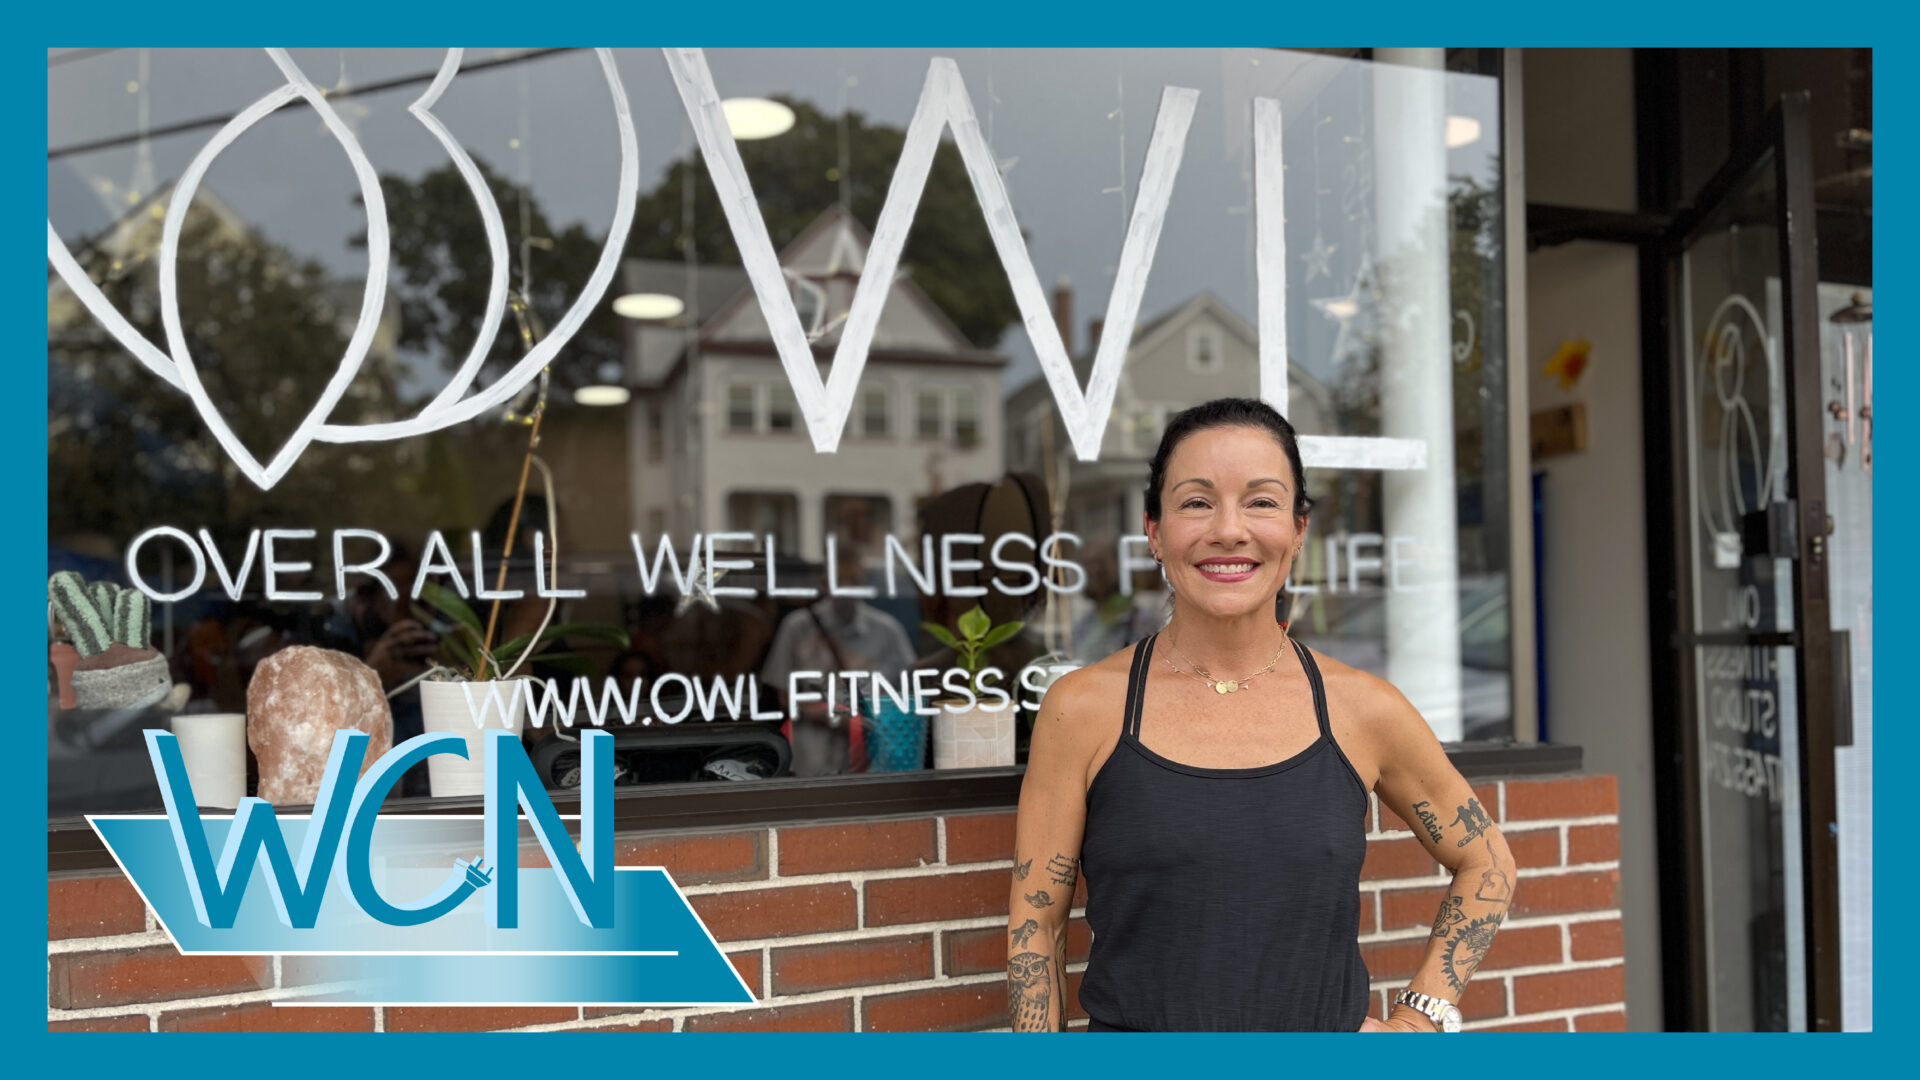 New Watertown Fitness Studio Offers Pilates, Yoga, and Personal Training